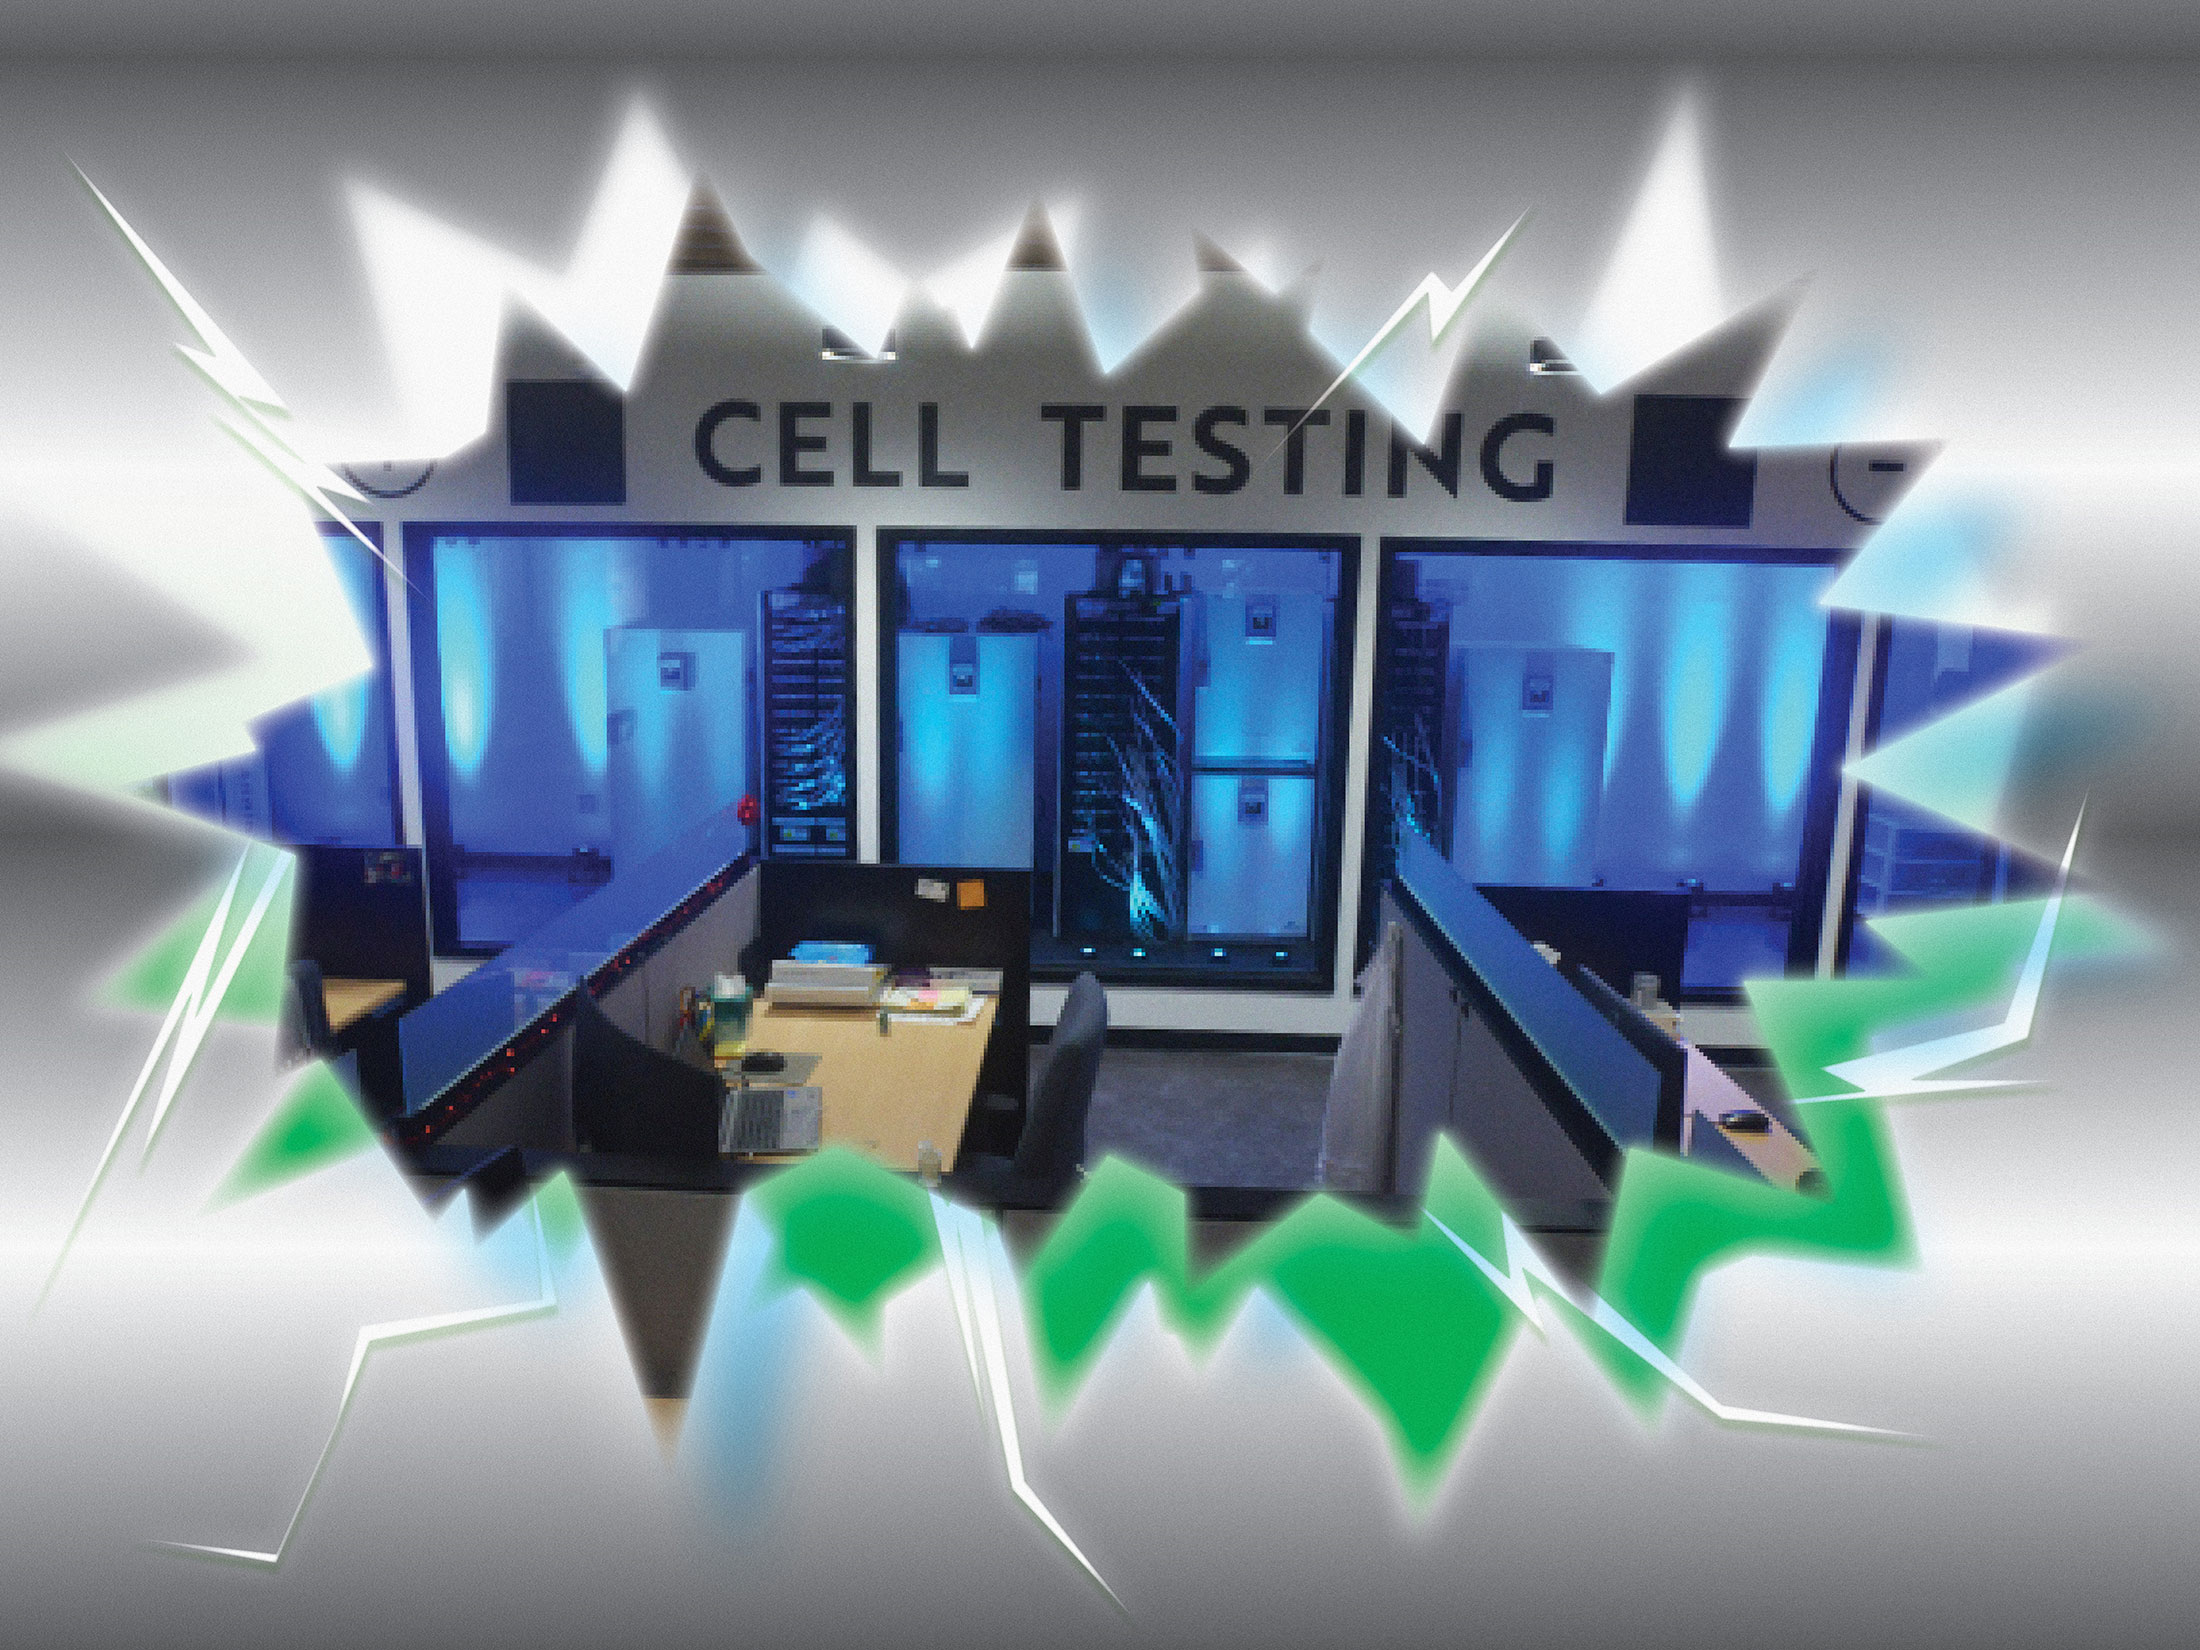 A 6K cell testing lab.